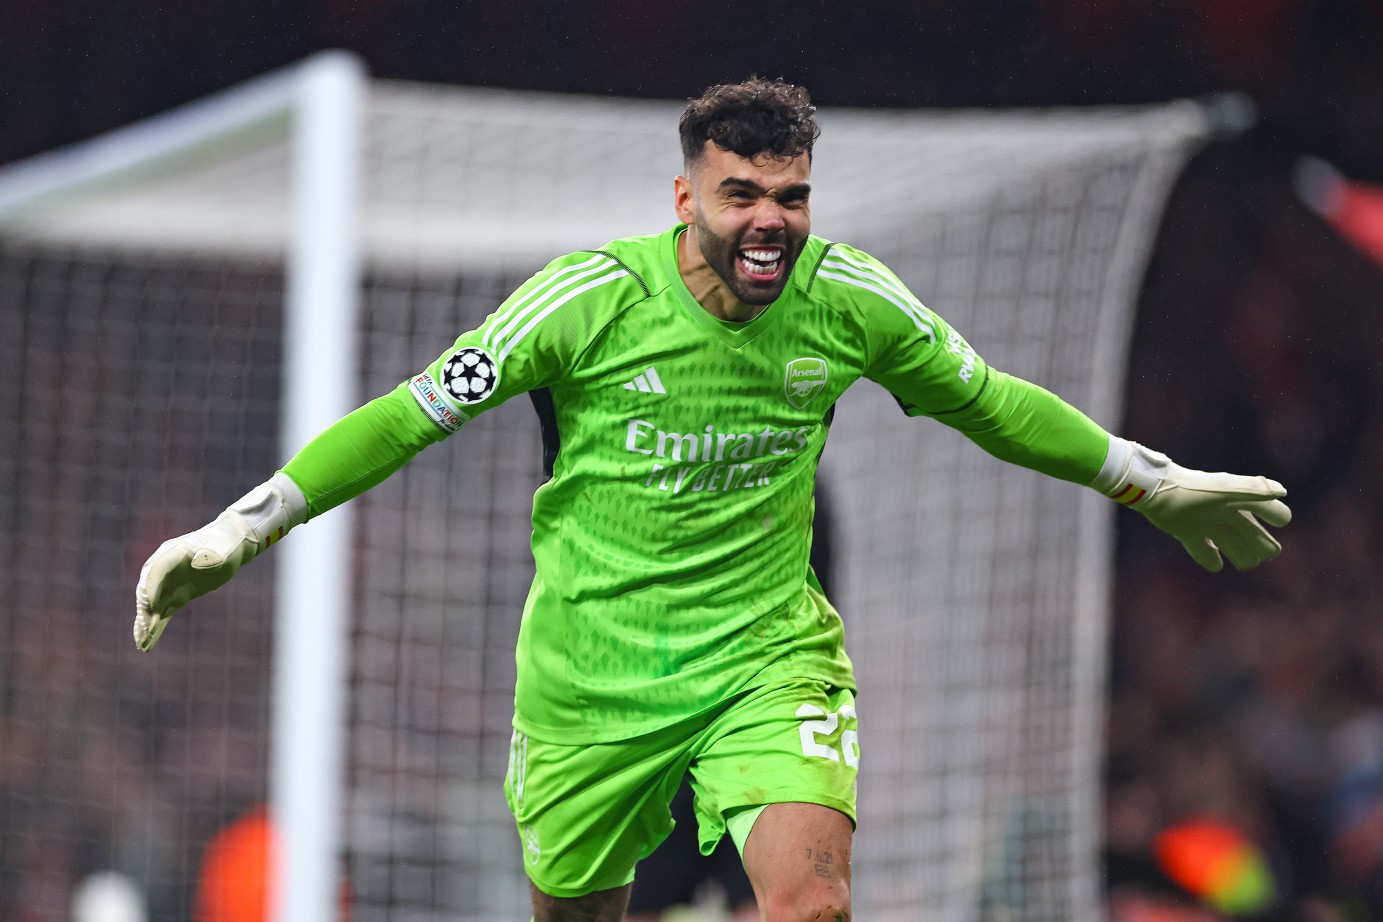 David Raya was the hero for Arsenal in the penalty shootout victory over Porto